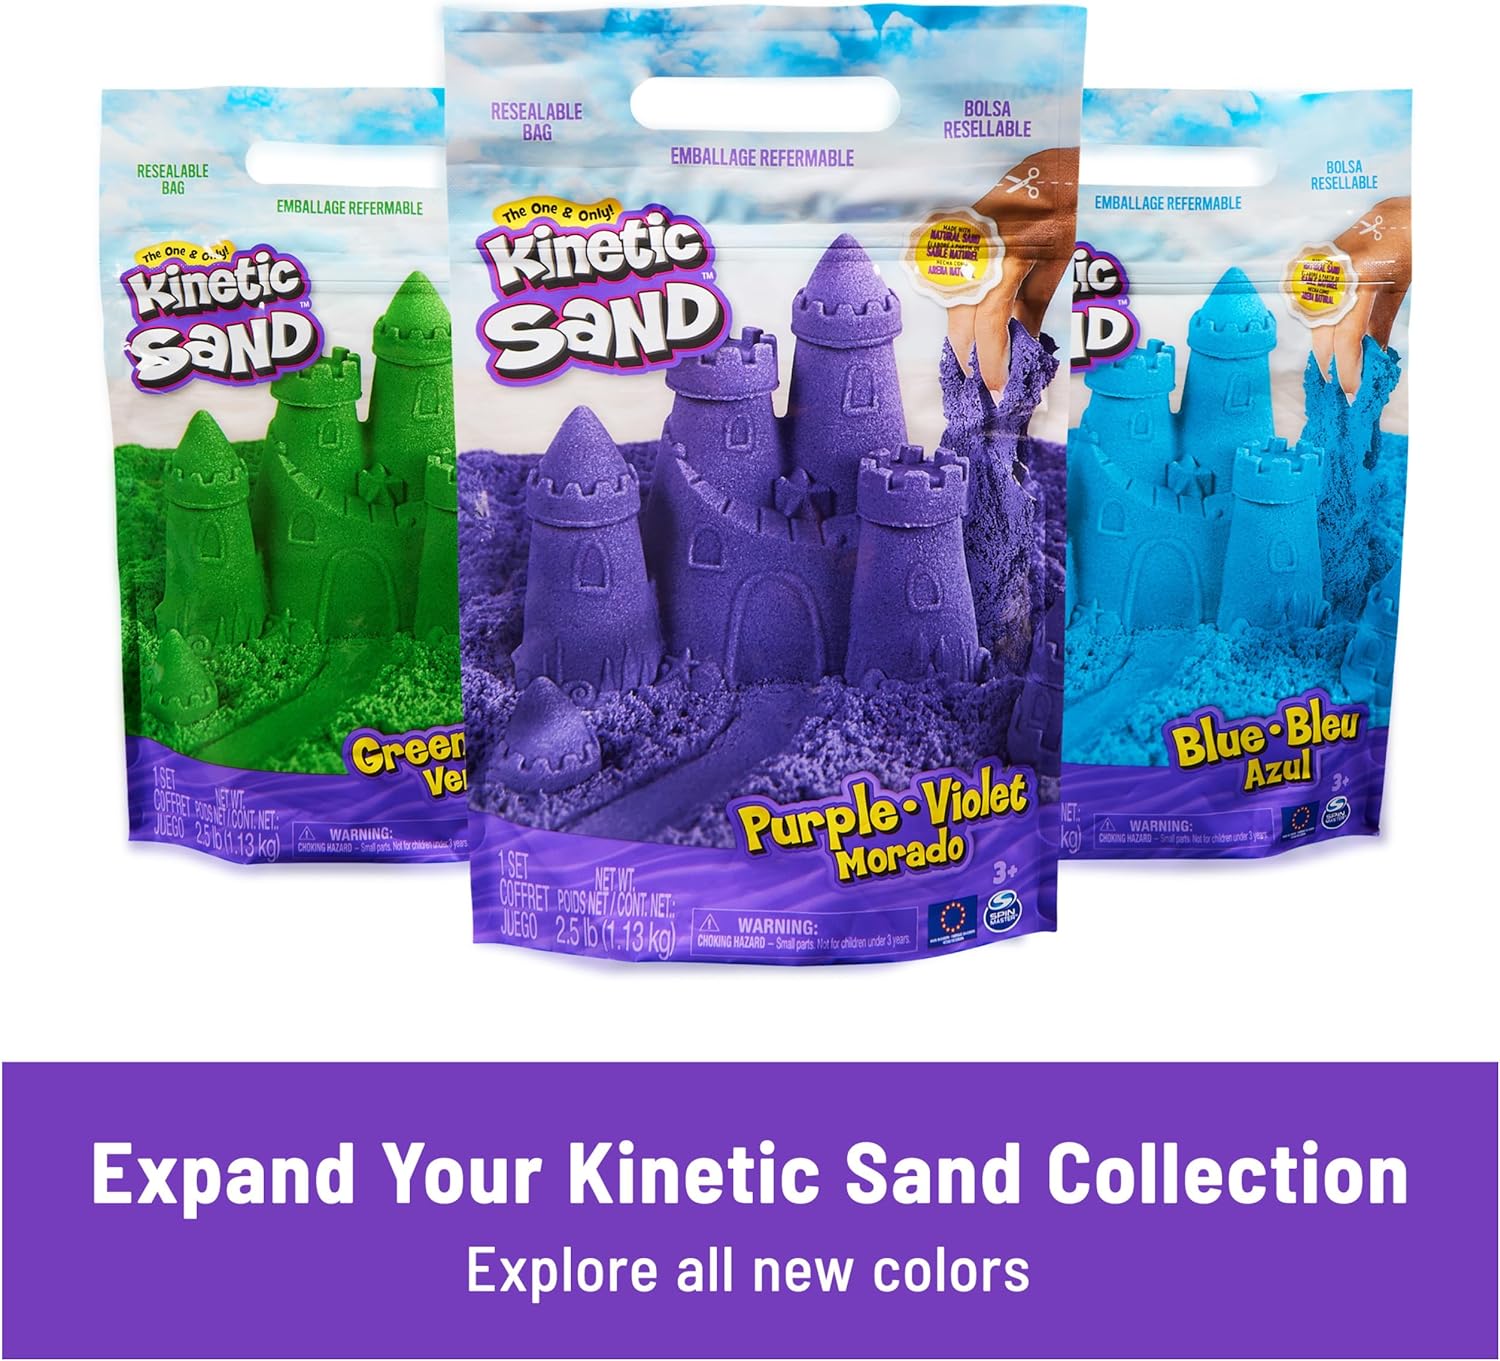 Kinetic Sand, Squish N’ Create Playset, with 13.5oz of Blue, Yellow & Pink Play Sand, 5 Tools, Stocking Stuffers for Kids